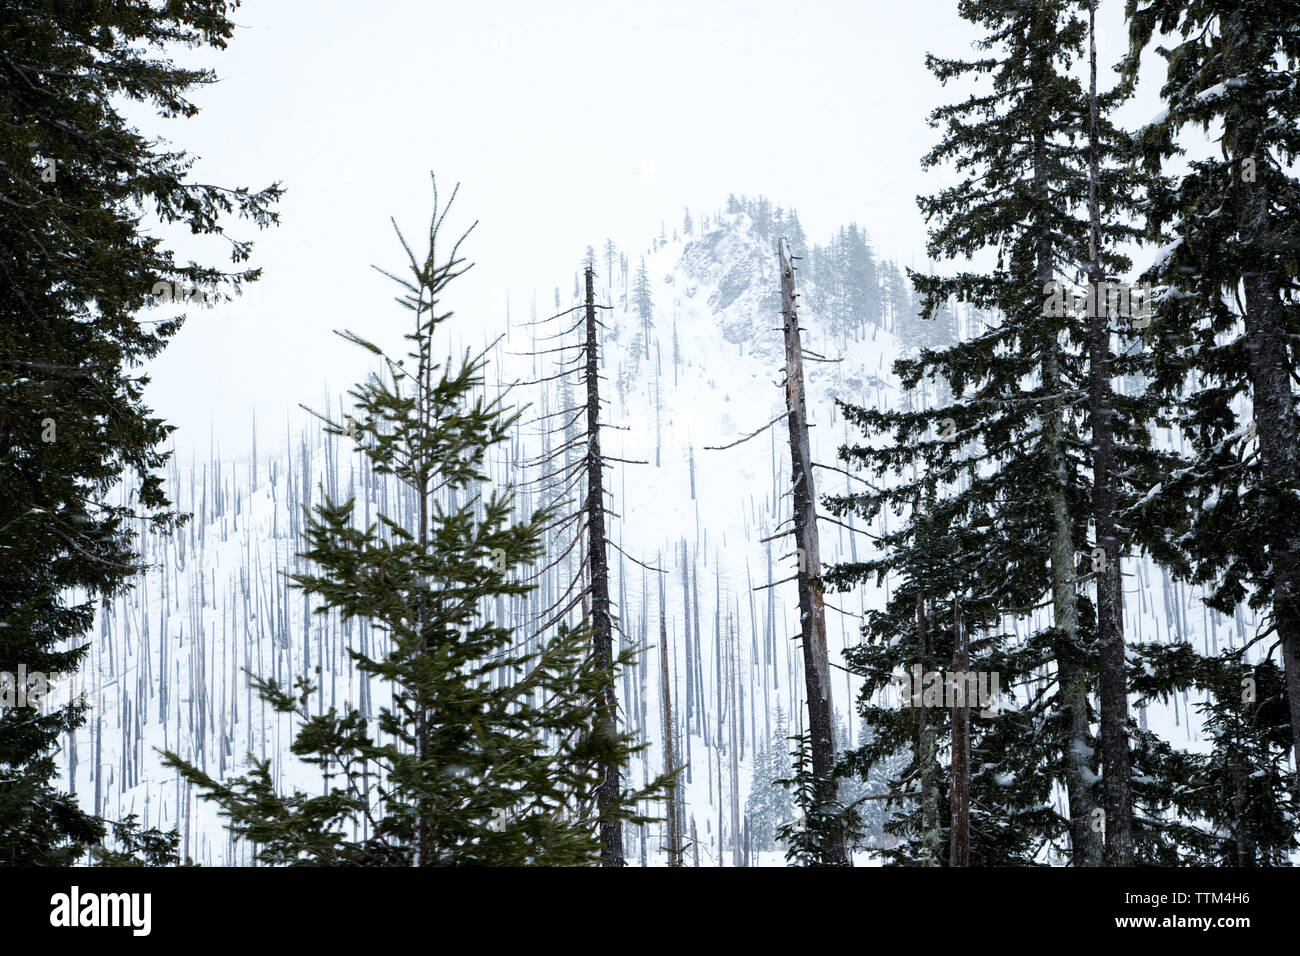 winter view of mountain, forest and trees burnt in forest fire Stock Photo